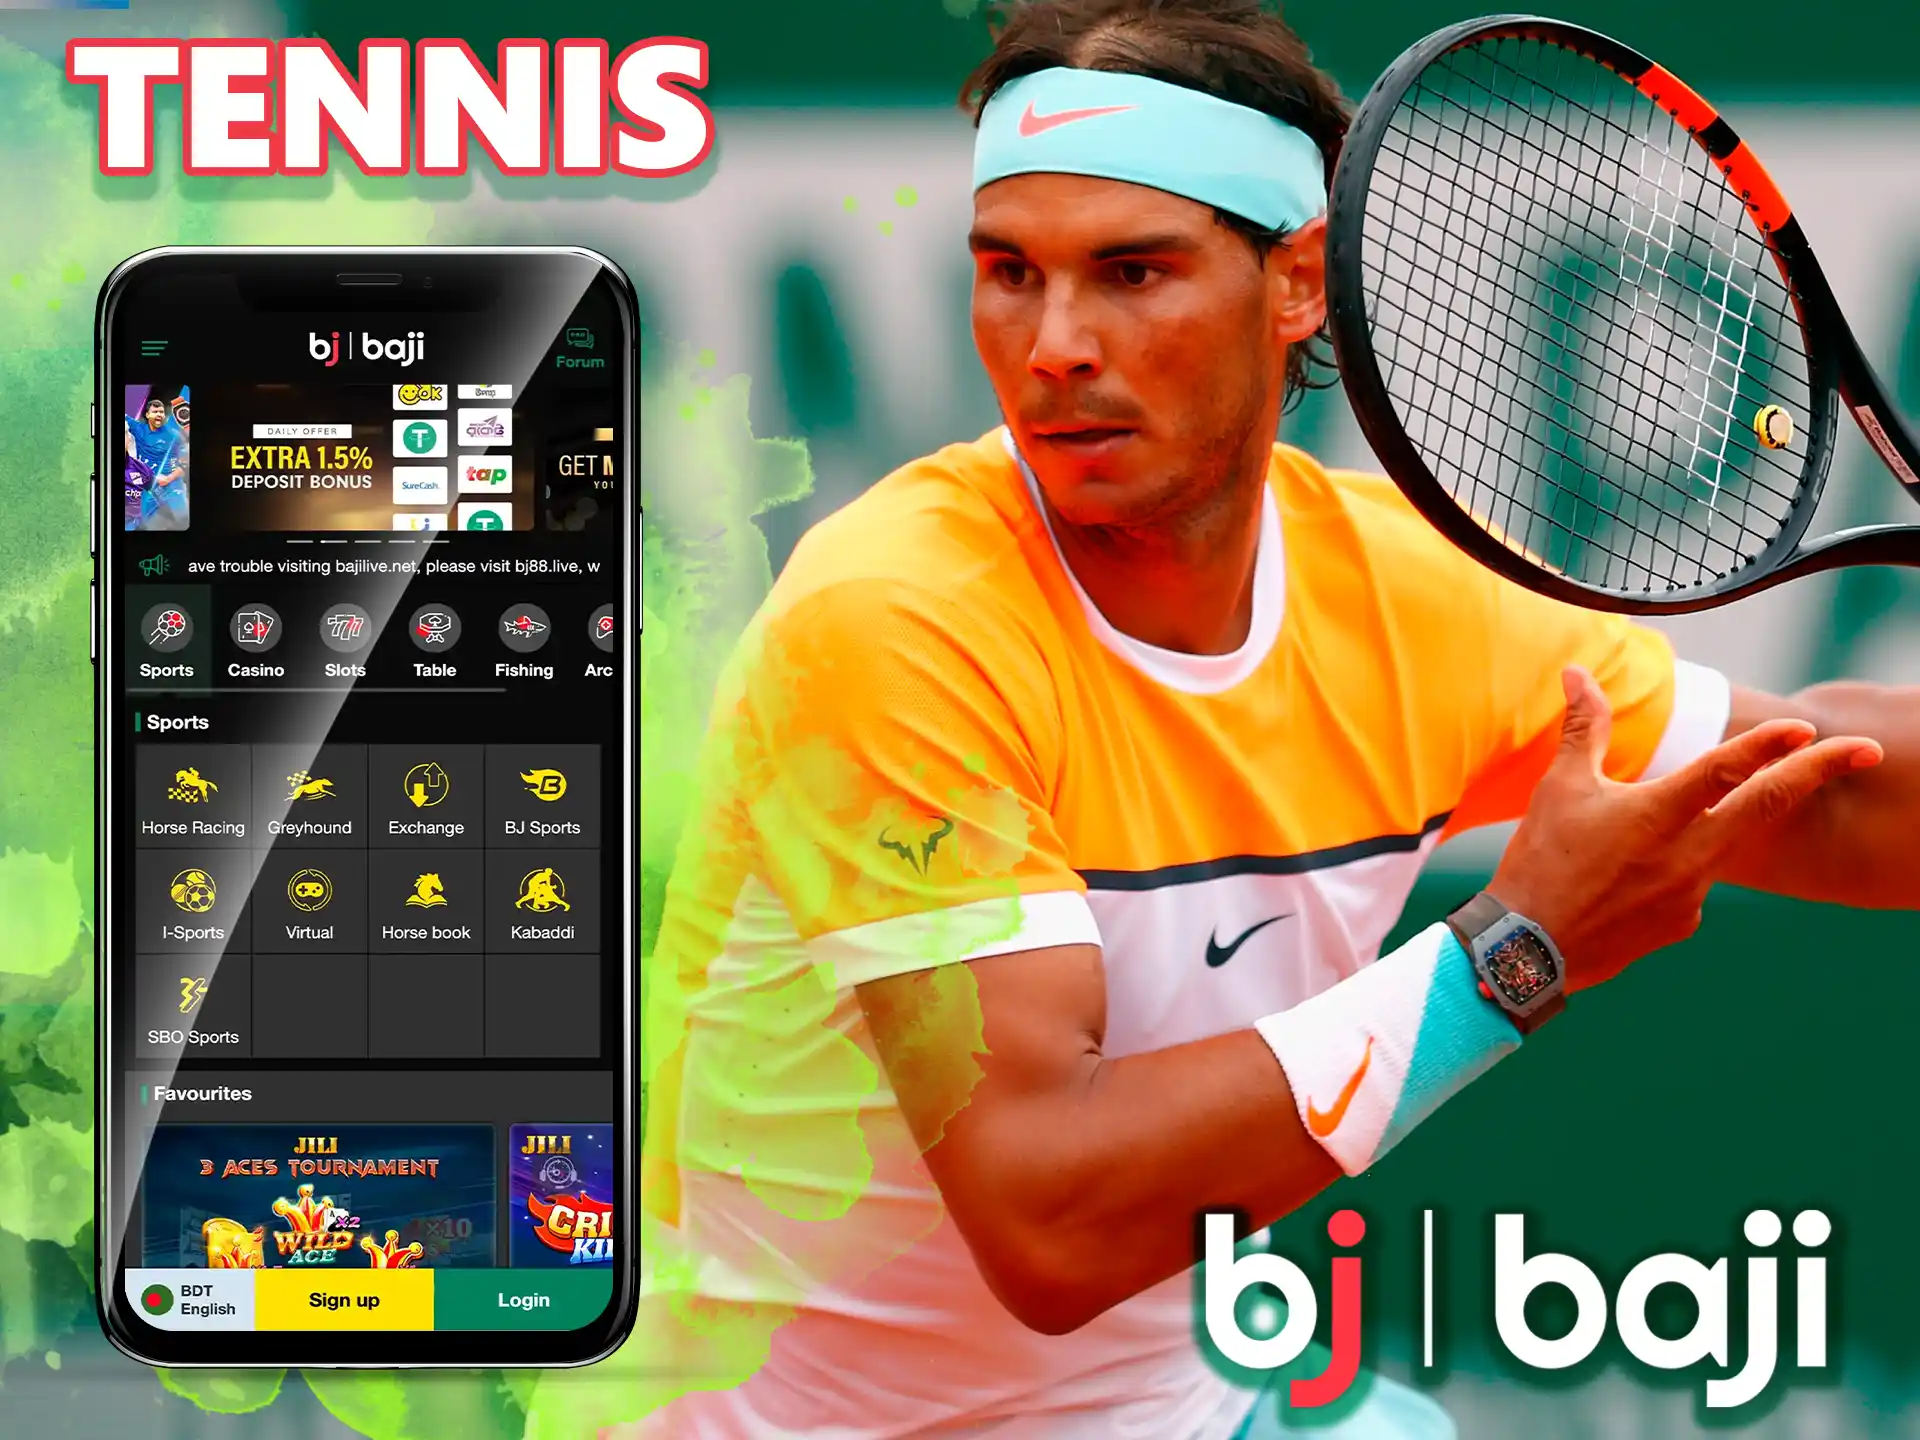 Try your hand at the world's most popular sport and place bets on top matches online at Baji.